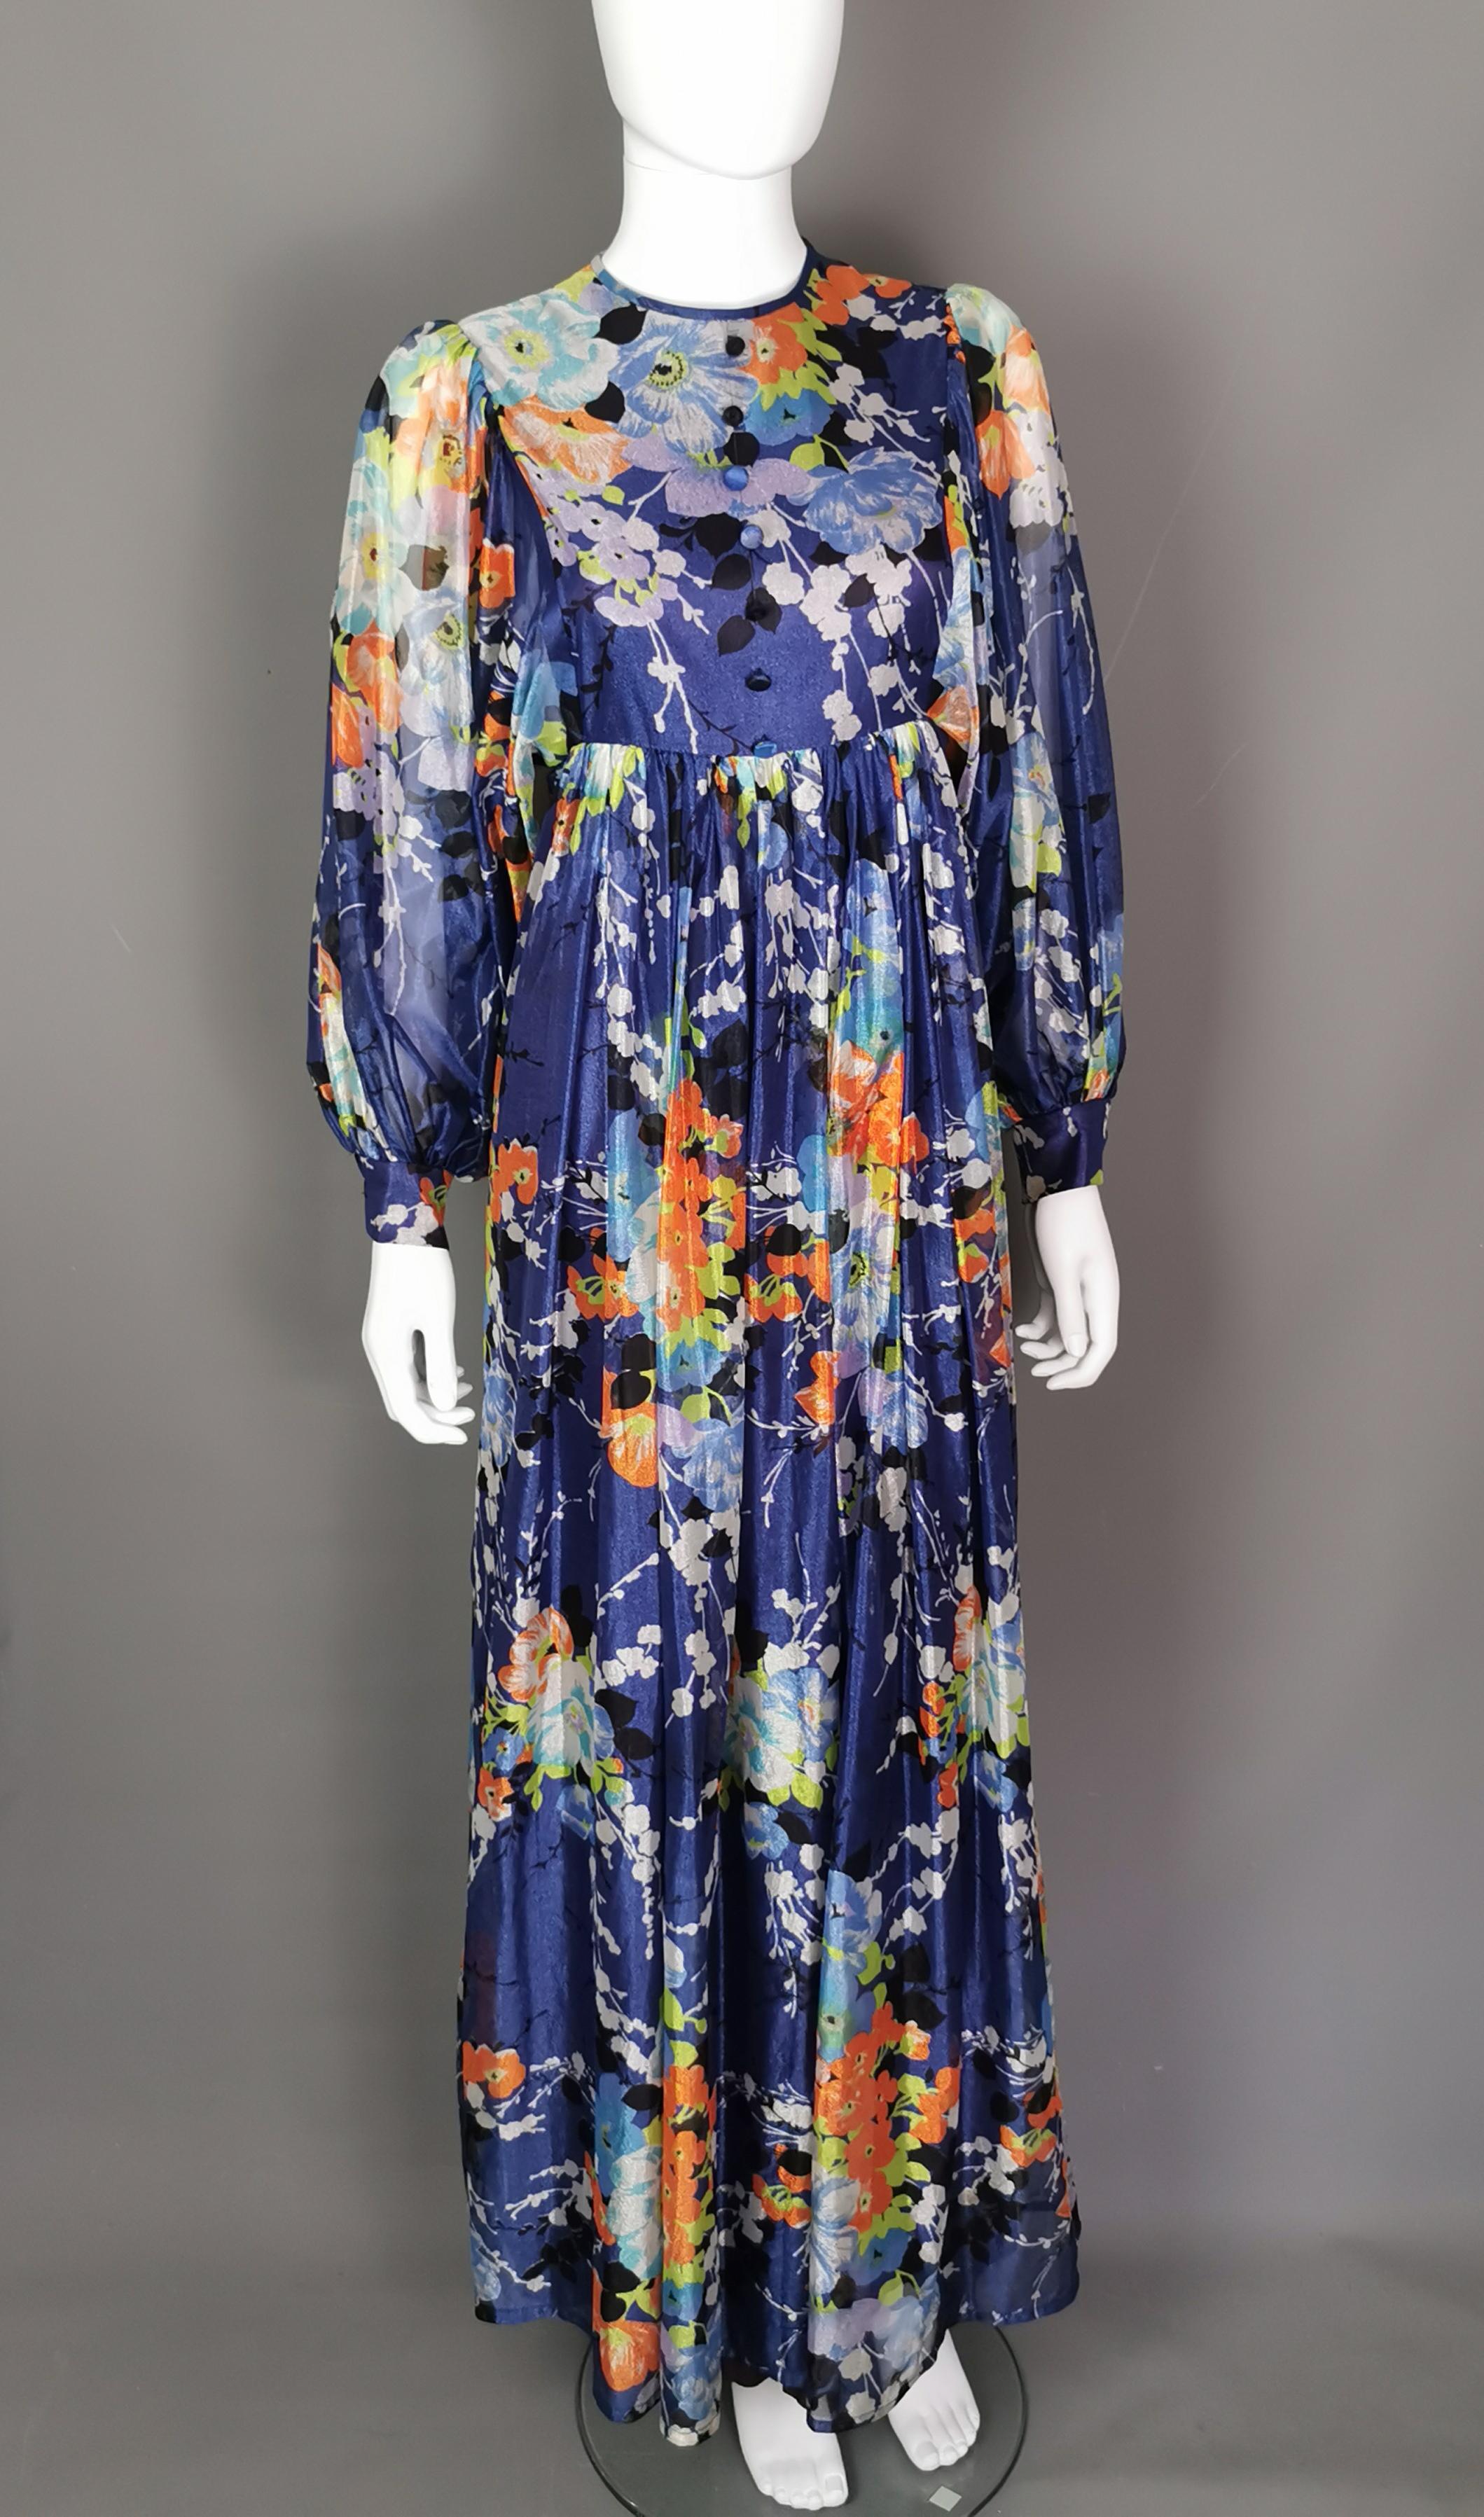 A gorgeous vintage 1970s caped maxi dress in a vibrant sky blue.

This dress is reminiscent of sunny 70s Festival days with its lightweight fabric, floral pattern and long sweeping skirt.

It is made from a lightweight polyester type fabric, the